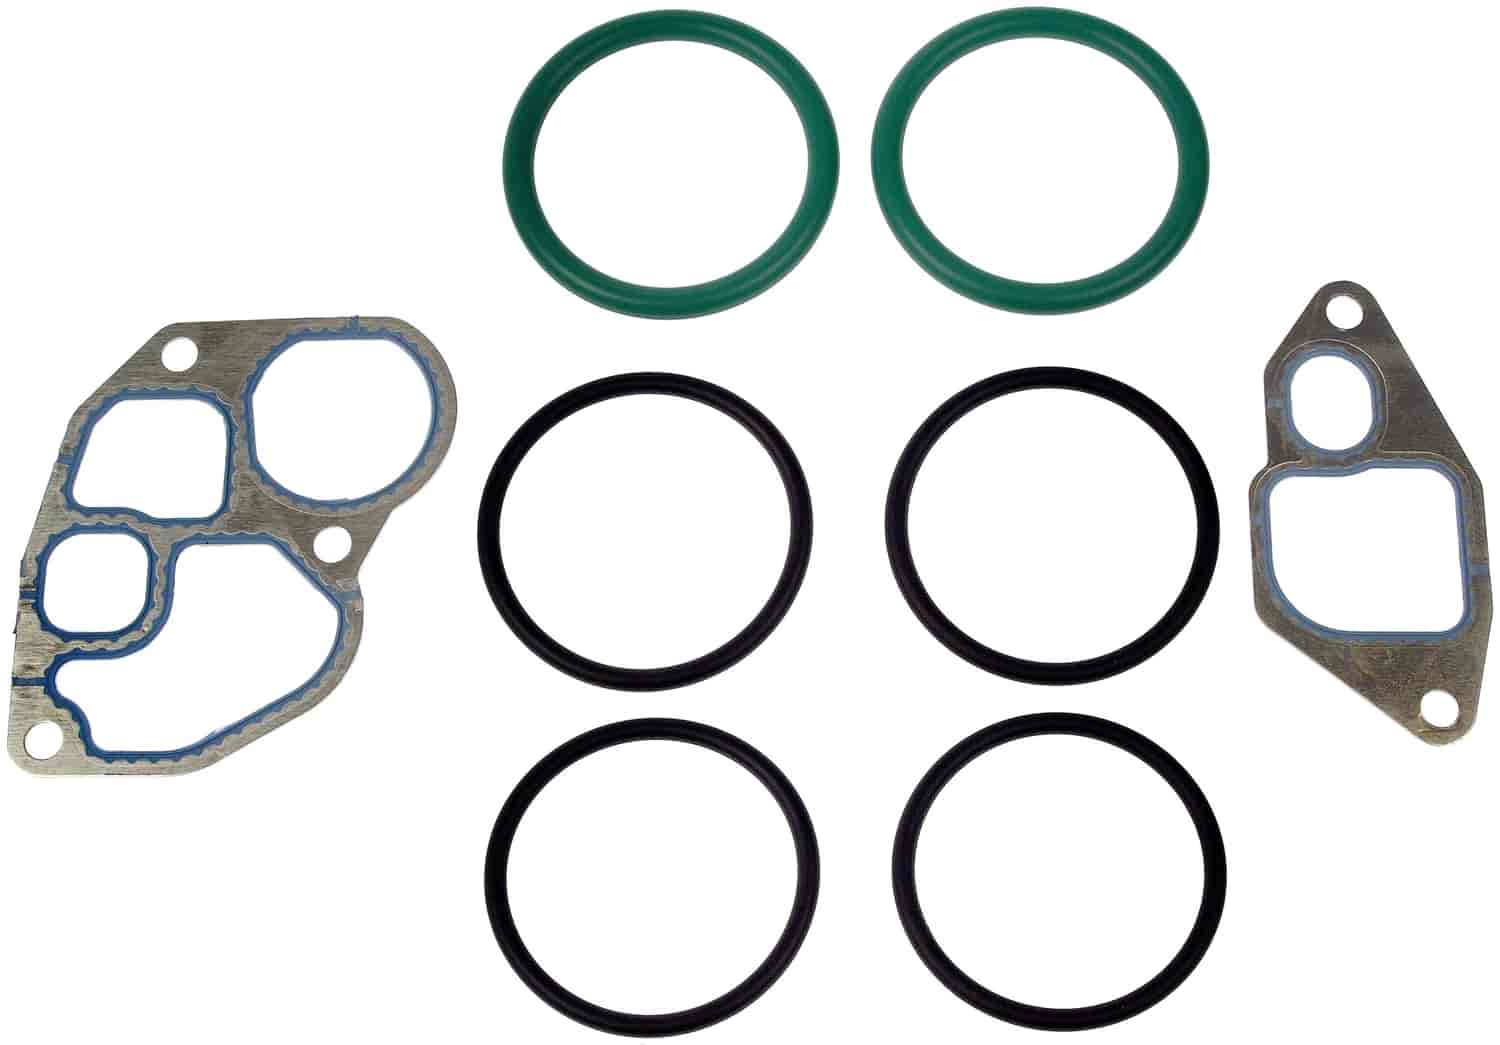 Oil Cooler Gasket Kit Includes Gaskets and O-rings